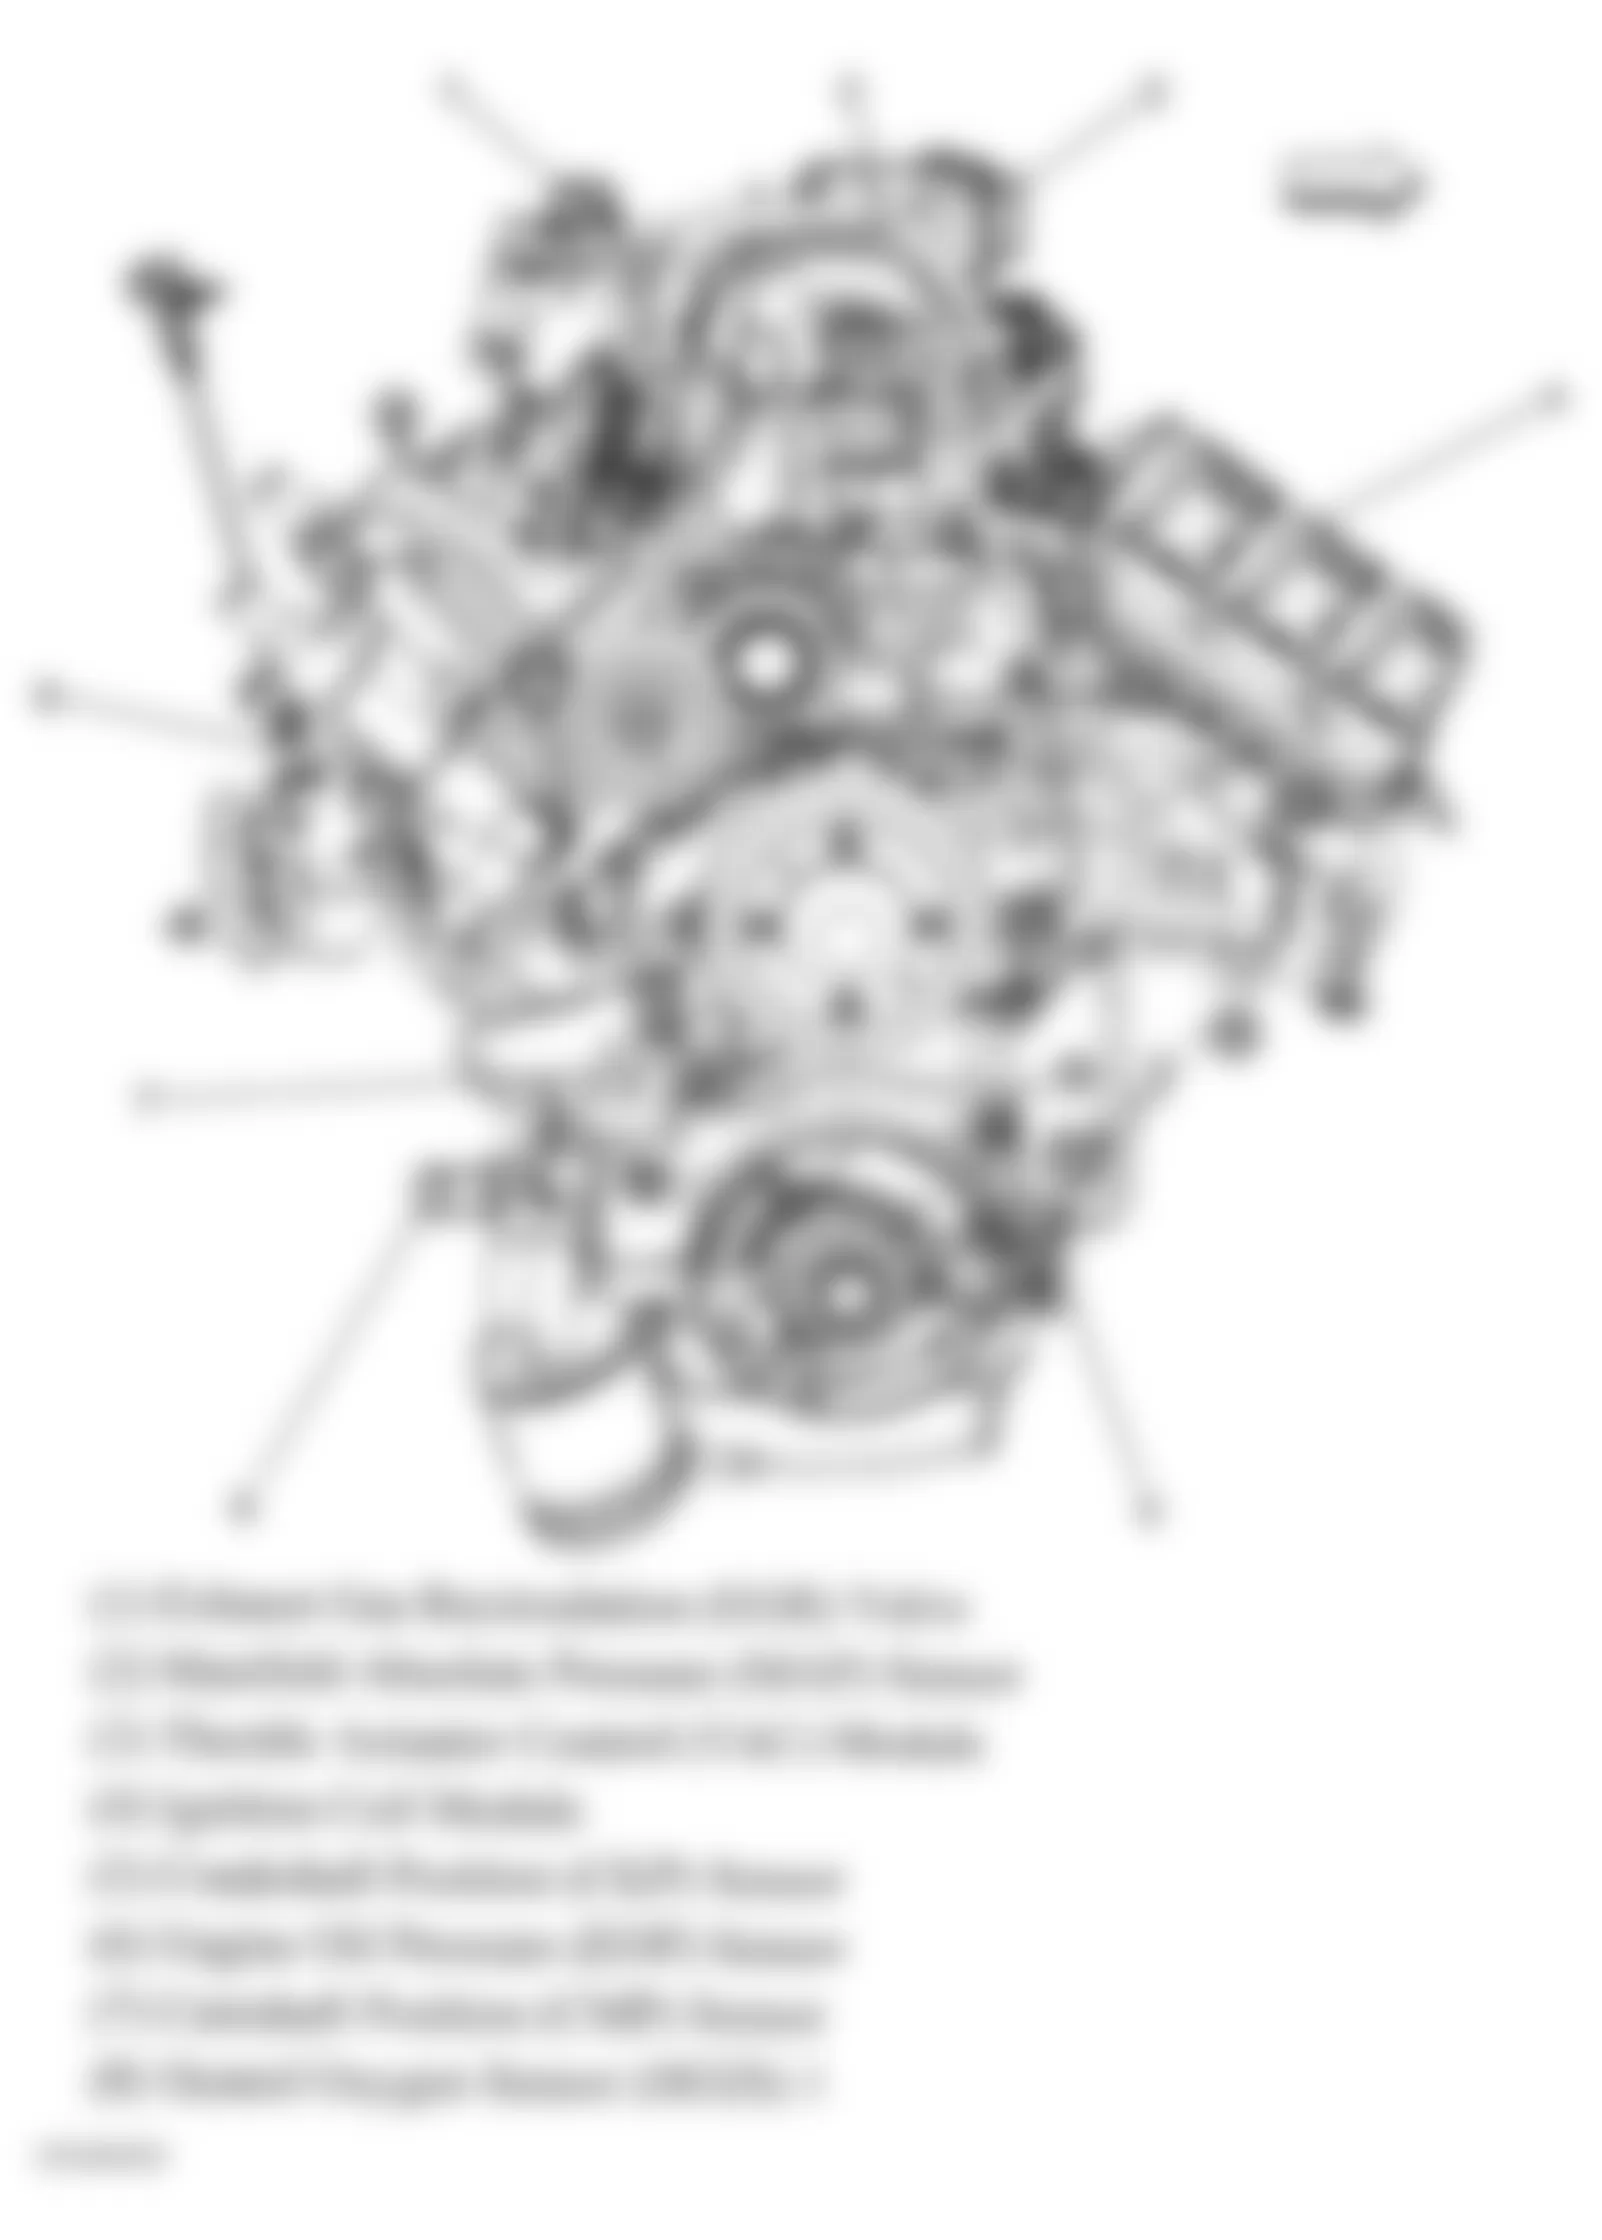 Buick LaCrosse CXS 2006 - Component Locations -  Front Of Engine (3.8L)